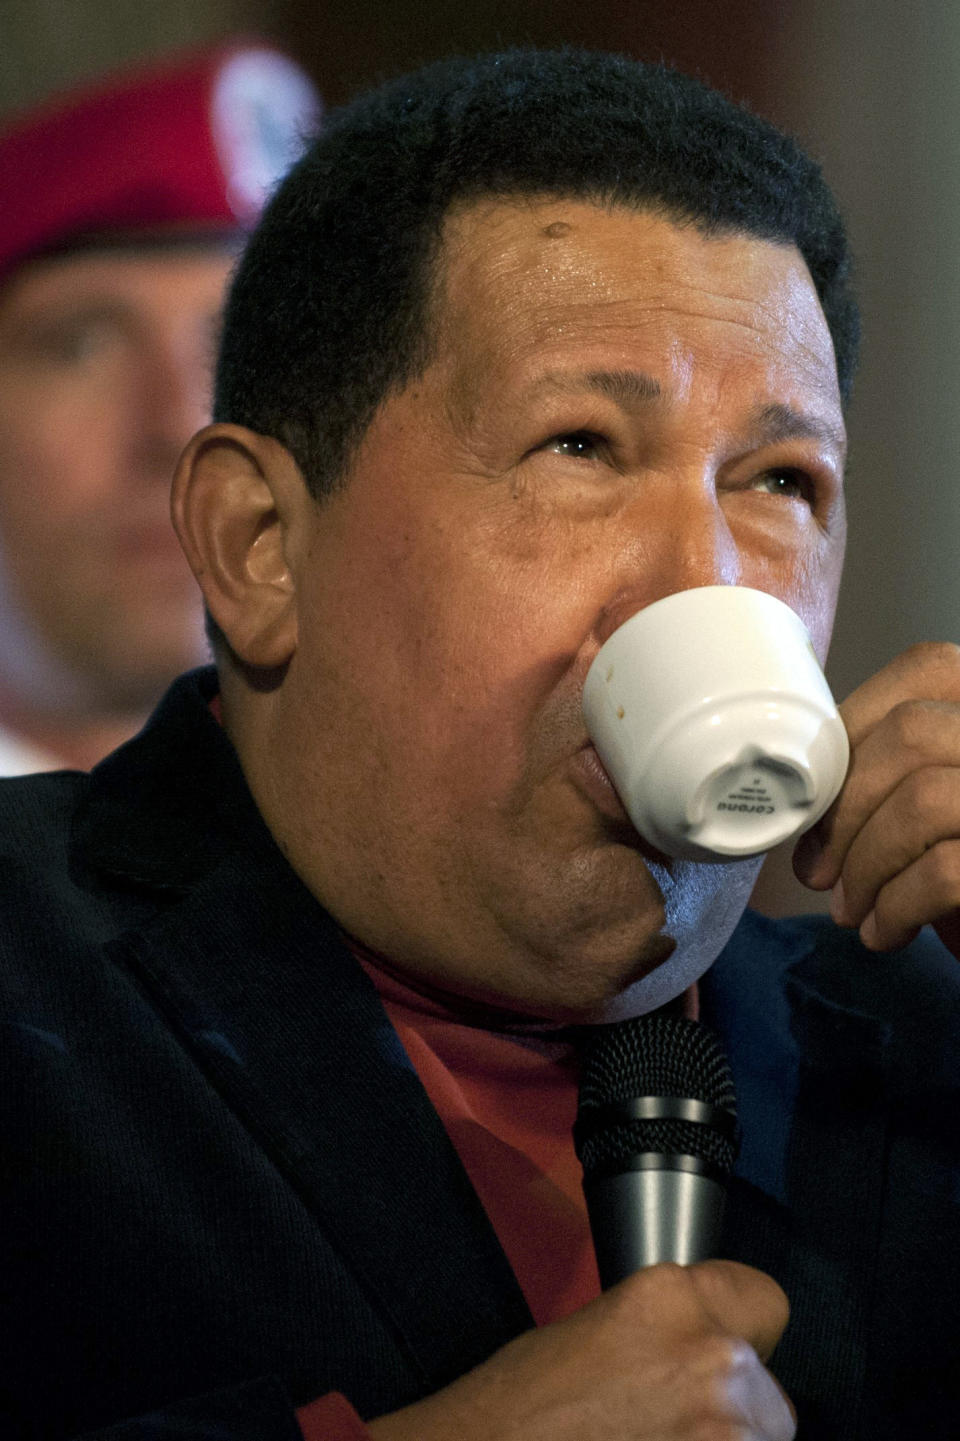 Venezuelan President and presidential candidate Hugo Chavez drinks coffee during a press conference at Miraflores Palace in Caracas on October 6, 2012. Chavez, in power for almost 14 years, is vying for a fourth term in office that would extend his presidency by another six years, but opposition candidate Henrique Capriles hopes to pull a major upset in the presidential elections on October 7 elections. PHOTO/Eitan Abramovich        (Photo credit should read EITAN ABRAMOVICH/AFP/GettyImages)